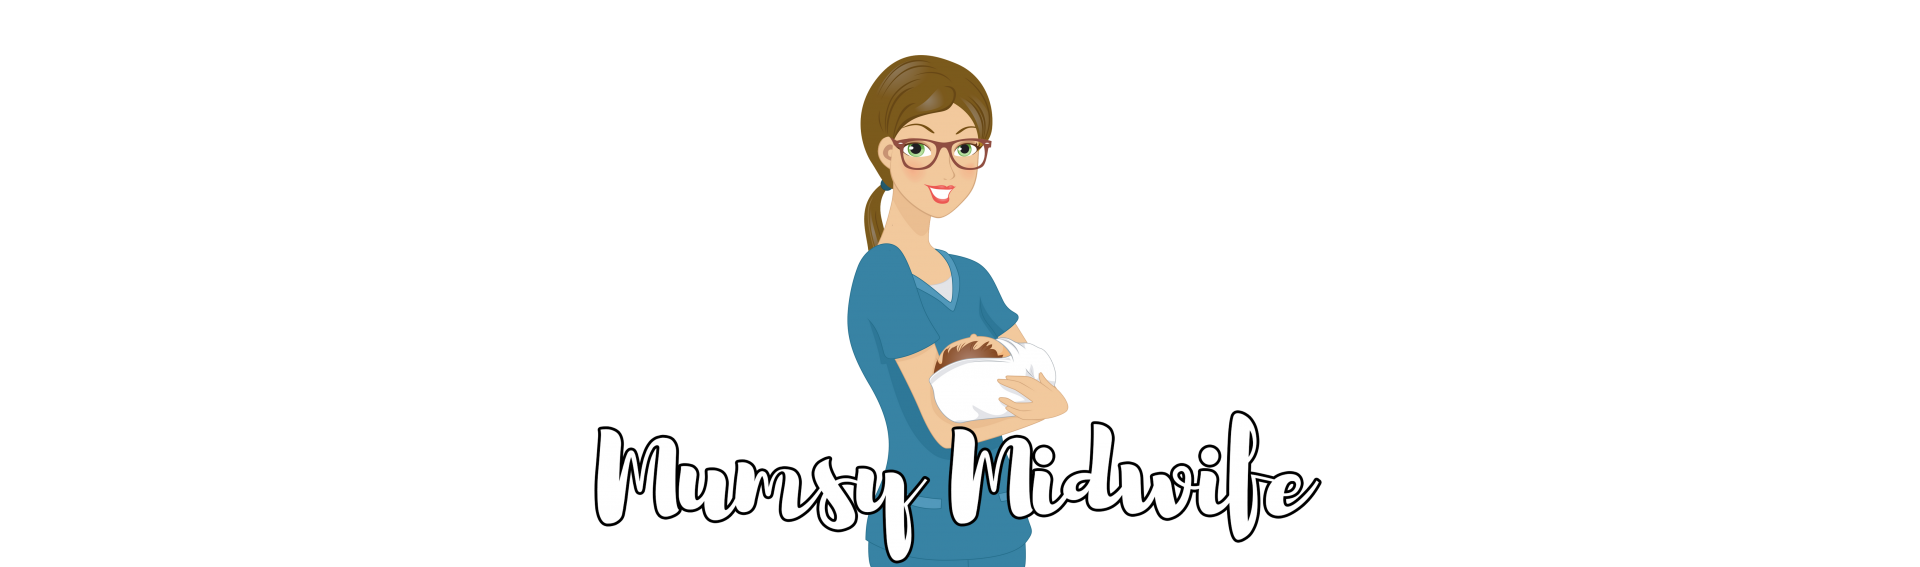 life clipart midwife